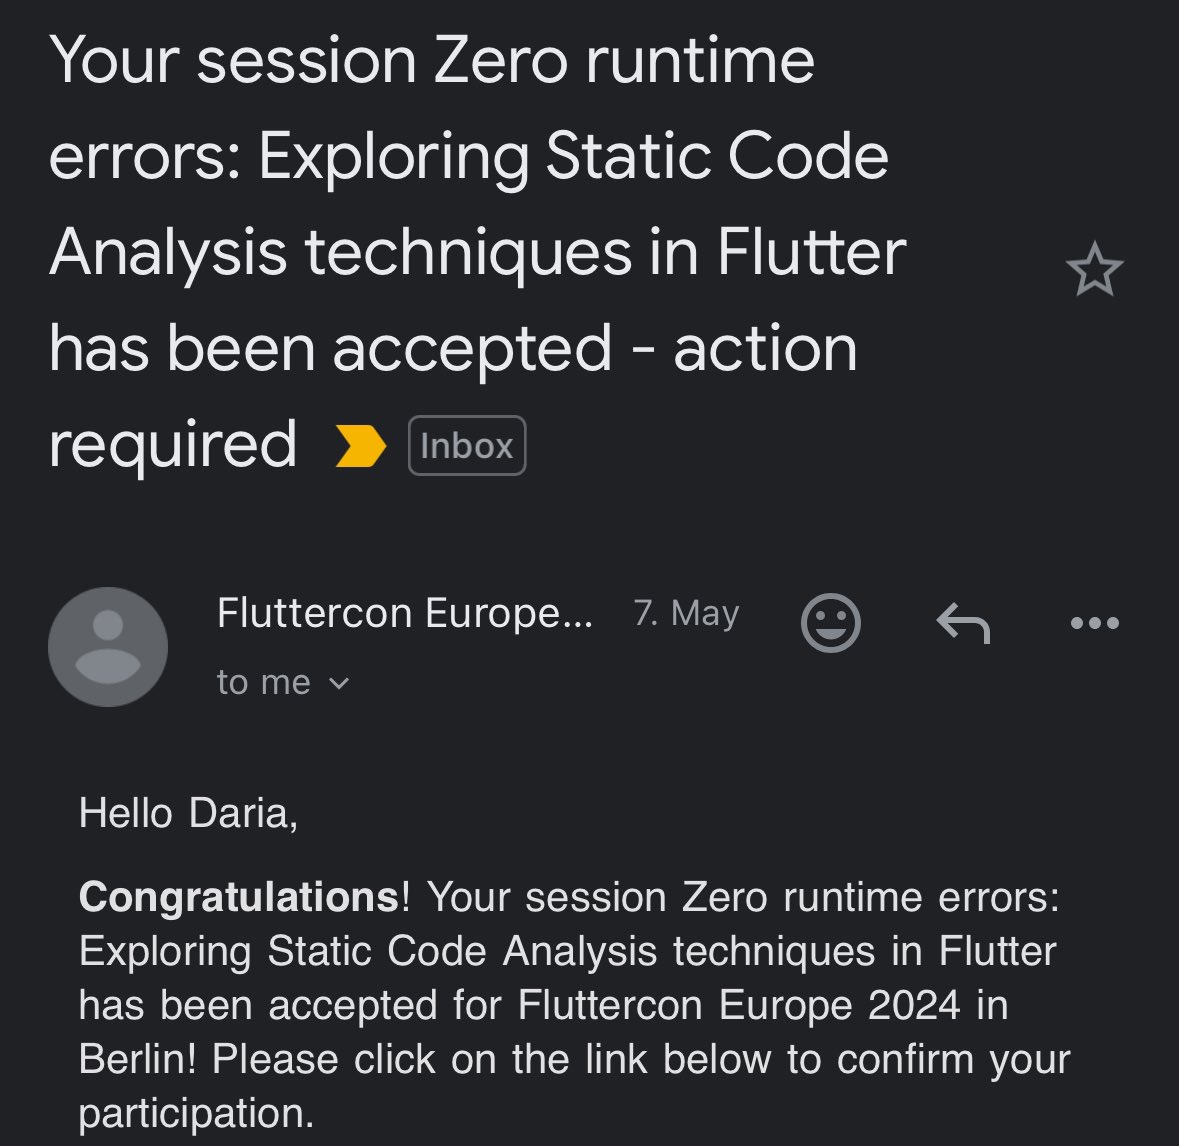 Will be spending a lot of time in Berlin this summer 😁 Happy to be in the @FlutterconWorld Berlin speaker lineup this year 🥹